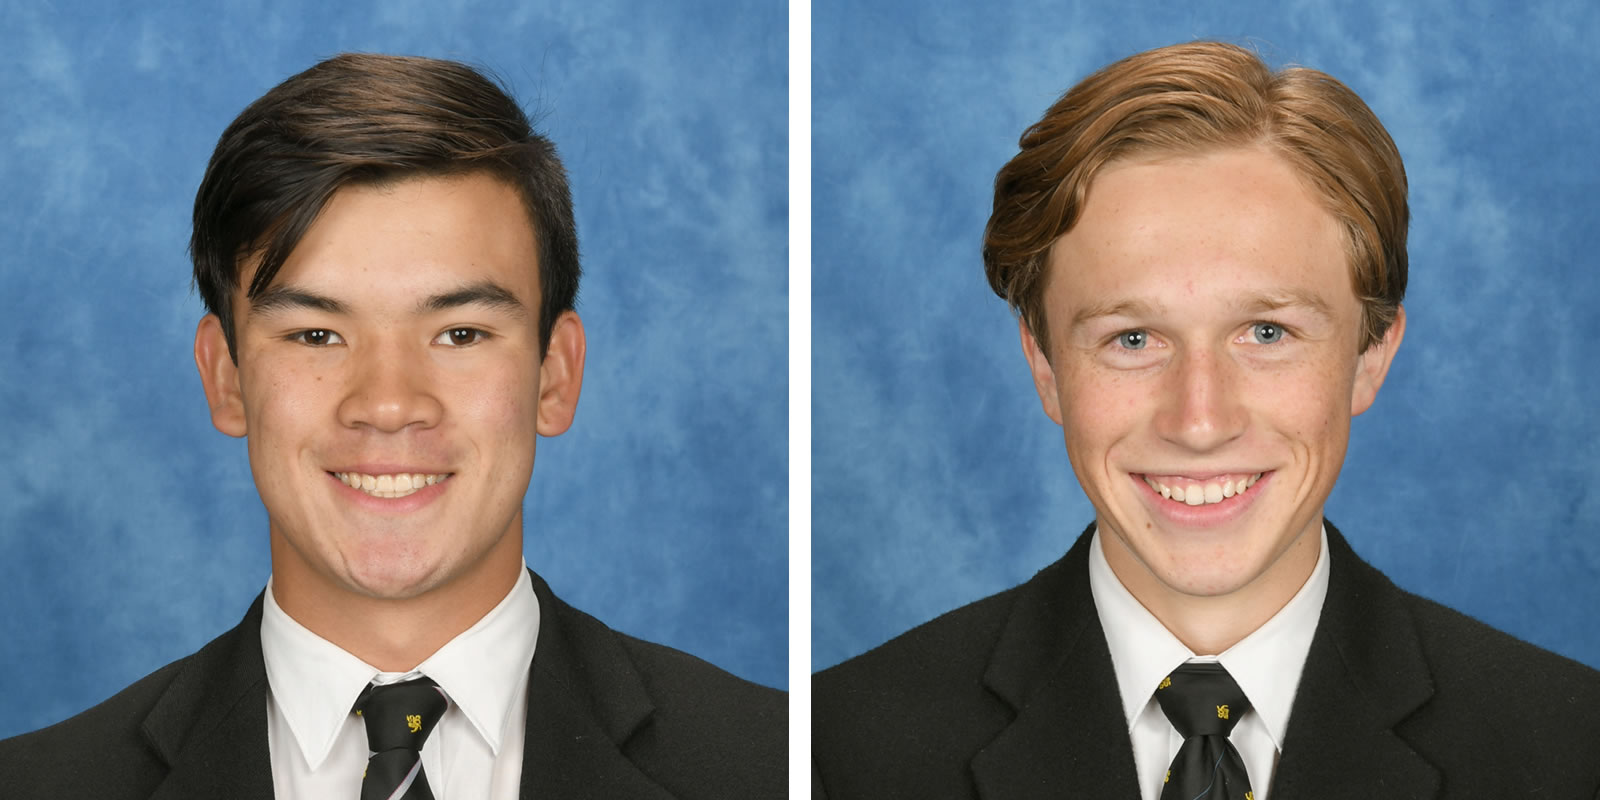 Oliver Burrows-Cheng (left) and Mackenzie Evans (right).